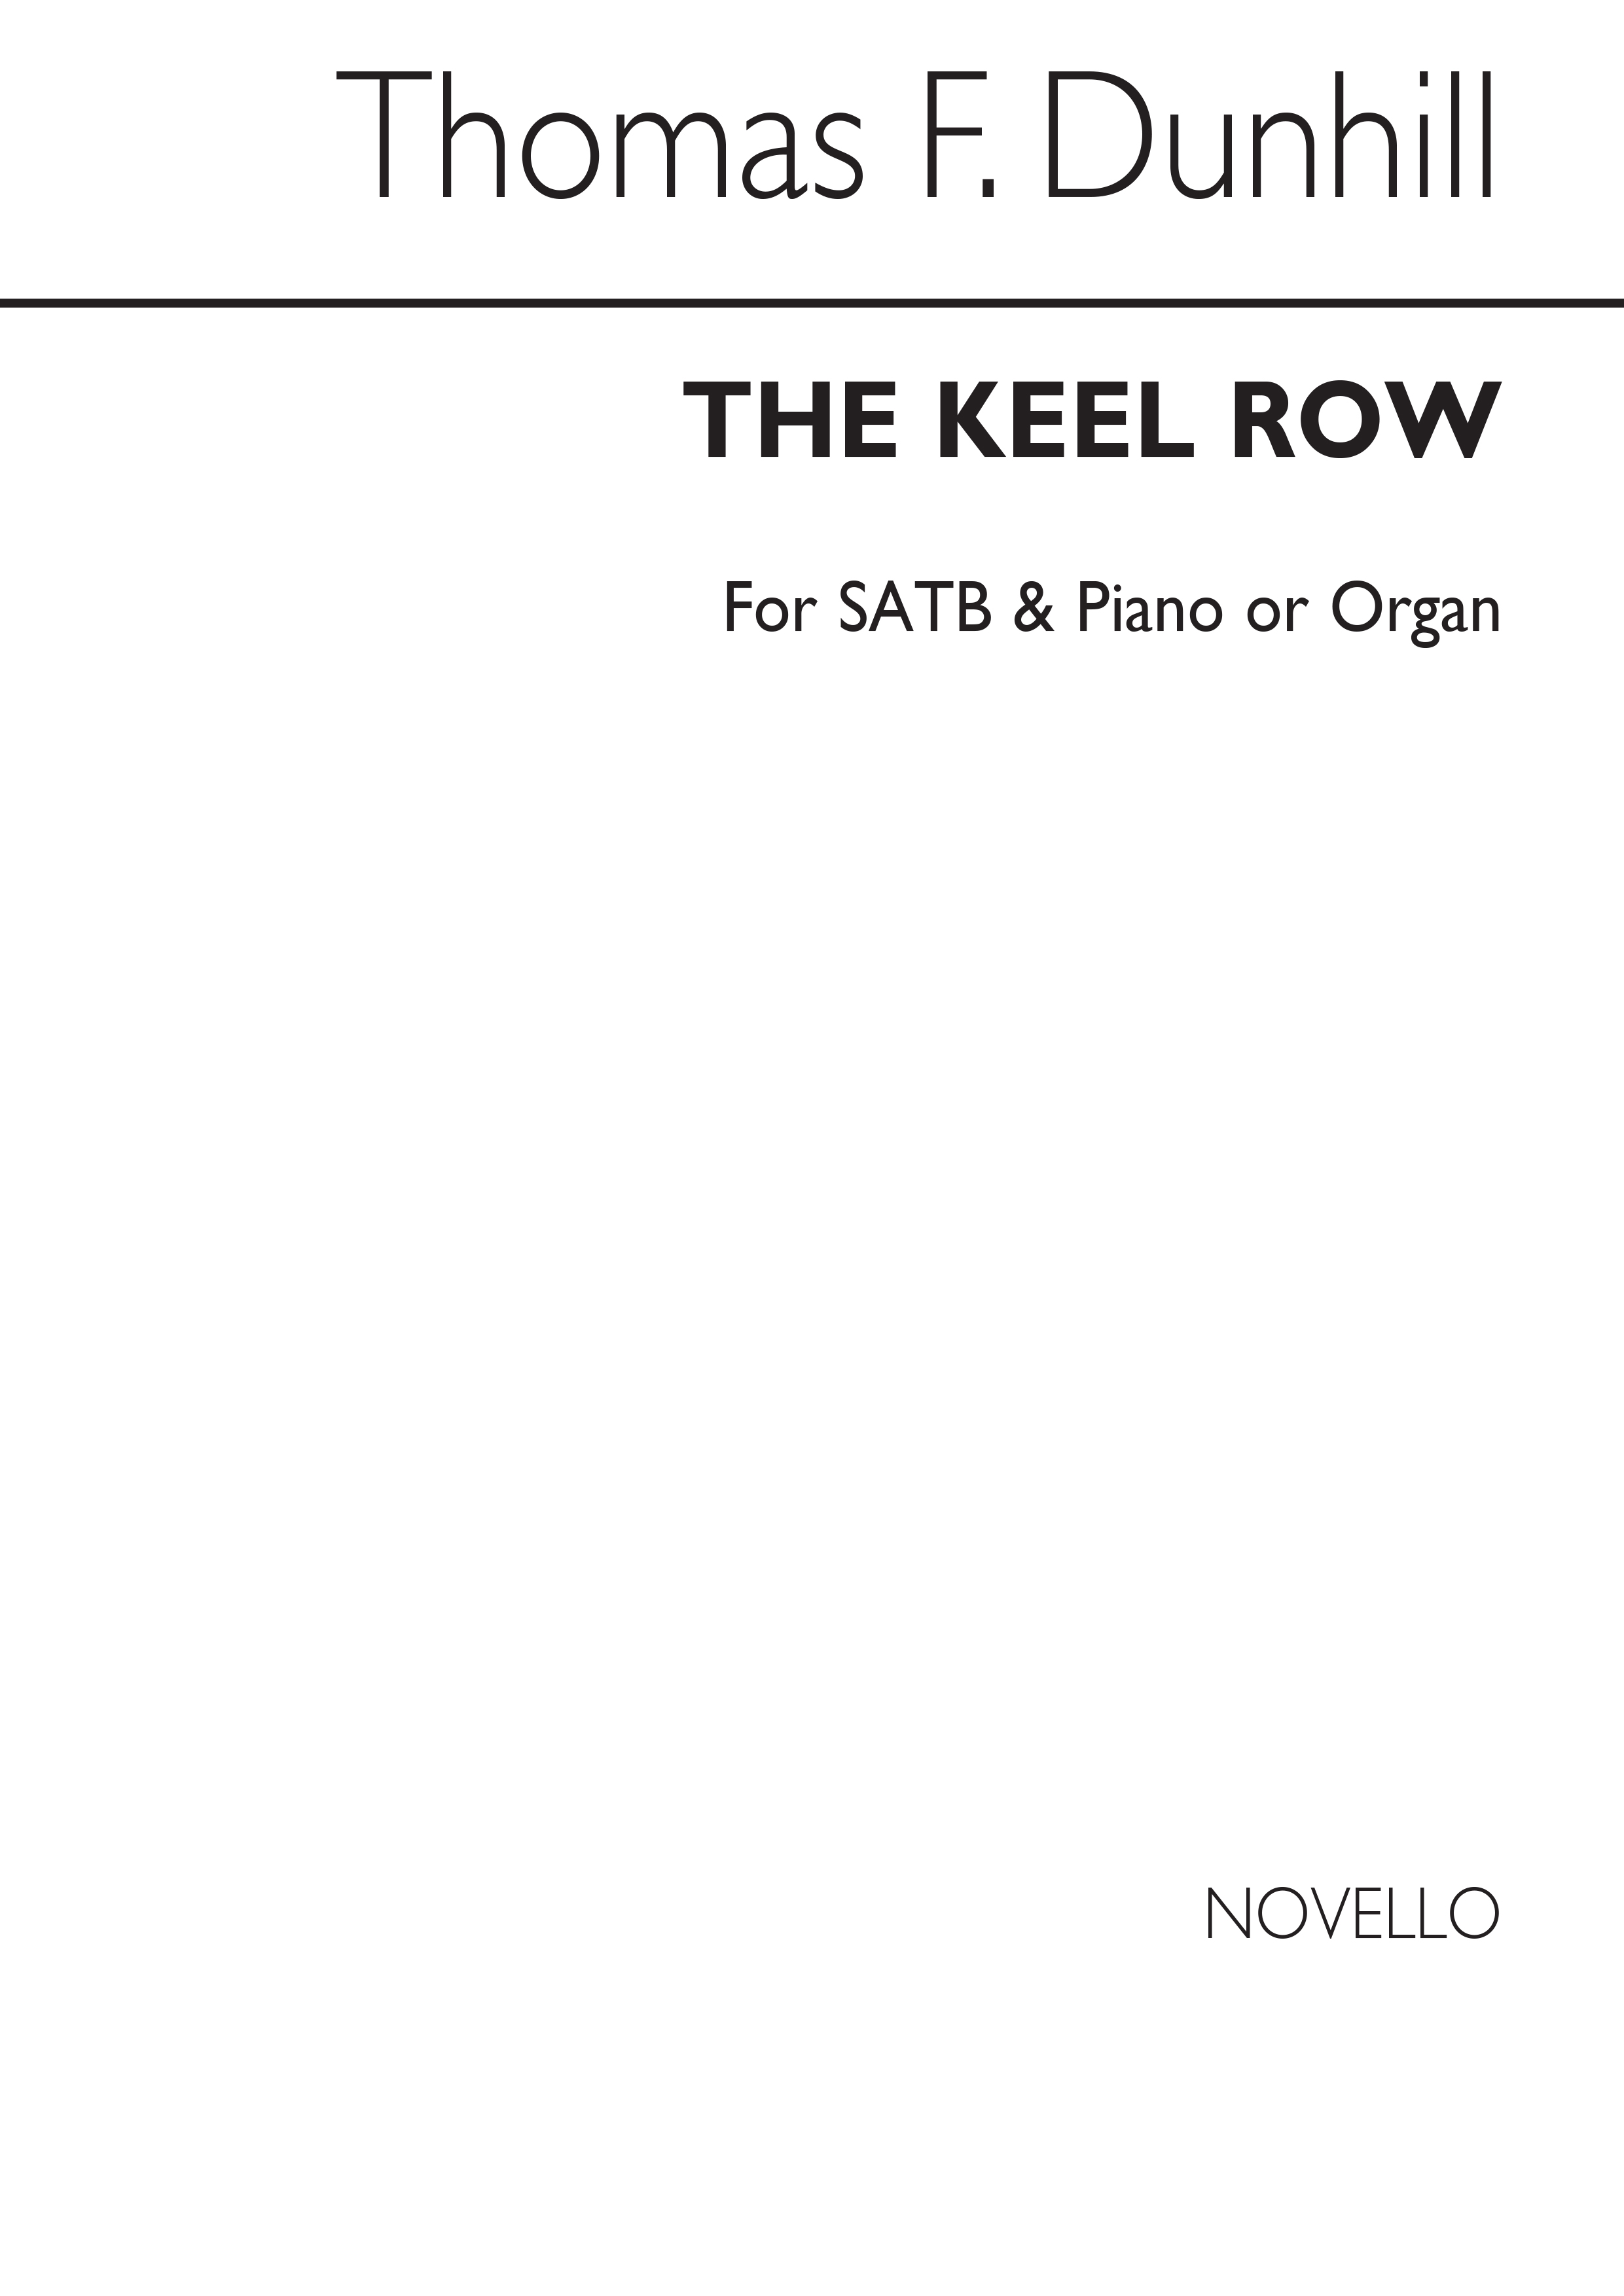 Dunhill: The Keel Row for SATB Chorus with accompaniment